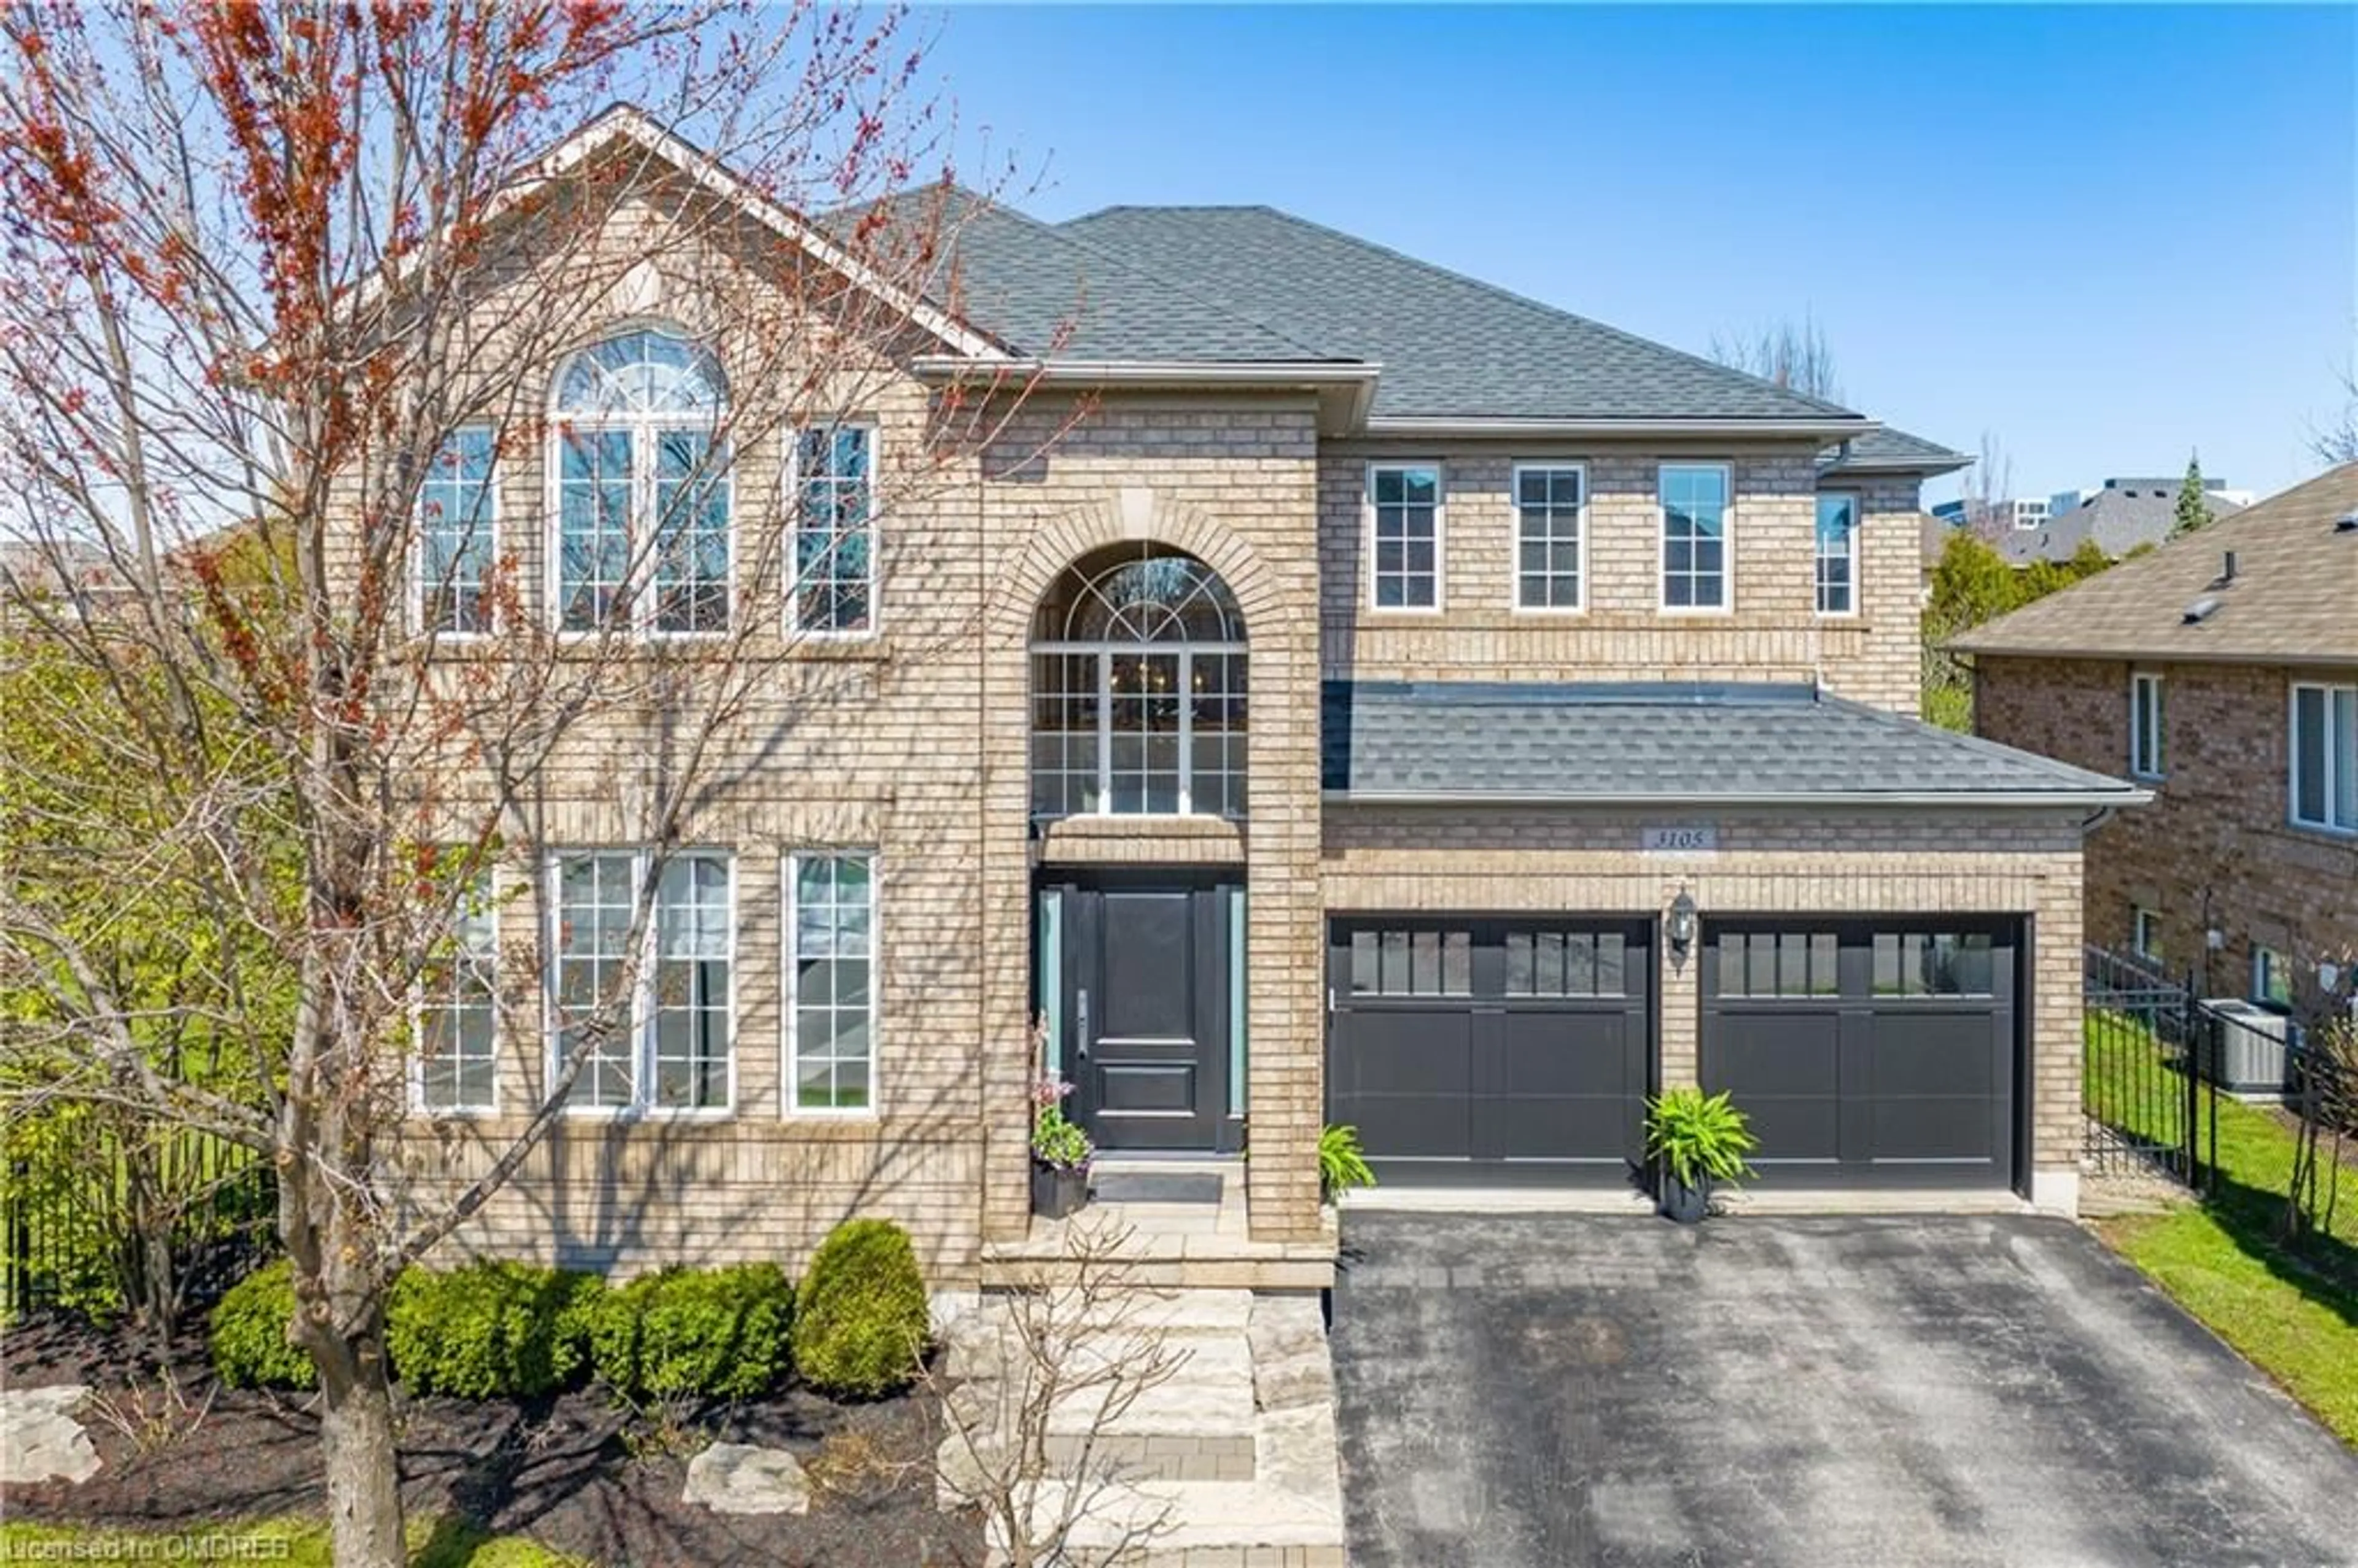 Home with brick exterior material for 3105 Portree Cres, Oakville Ontario L6M 5C4